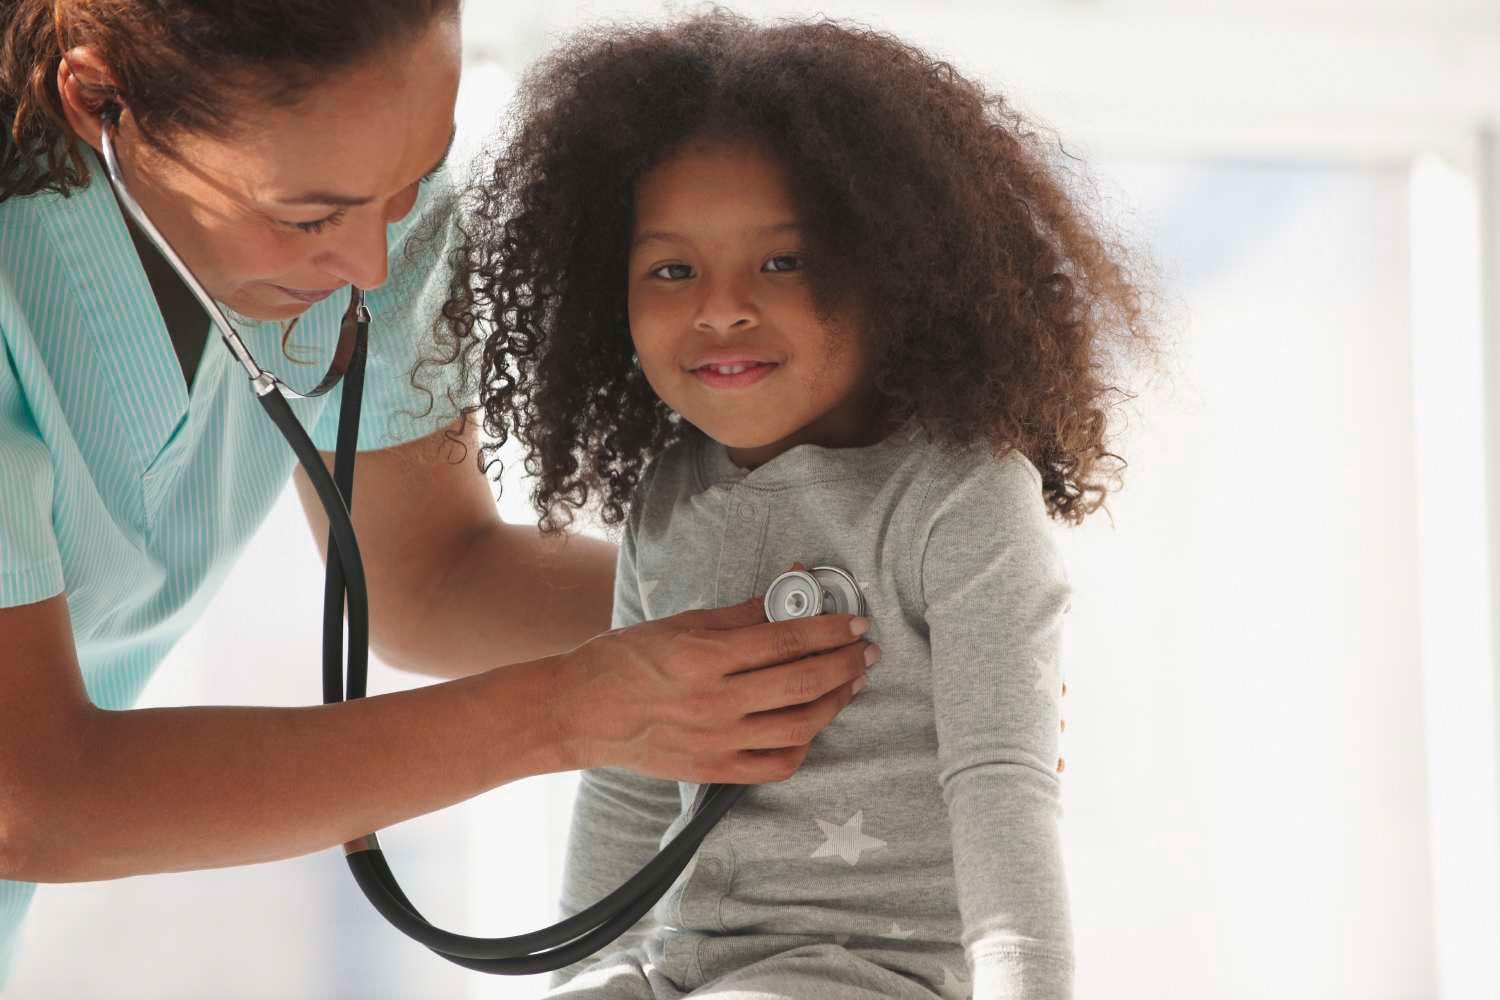 Female Doctor examining a child with stethoscope